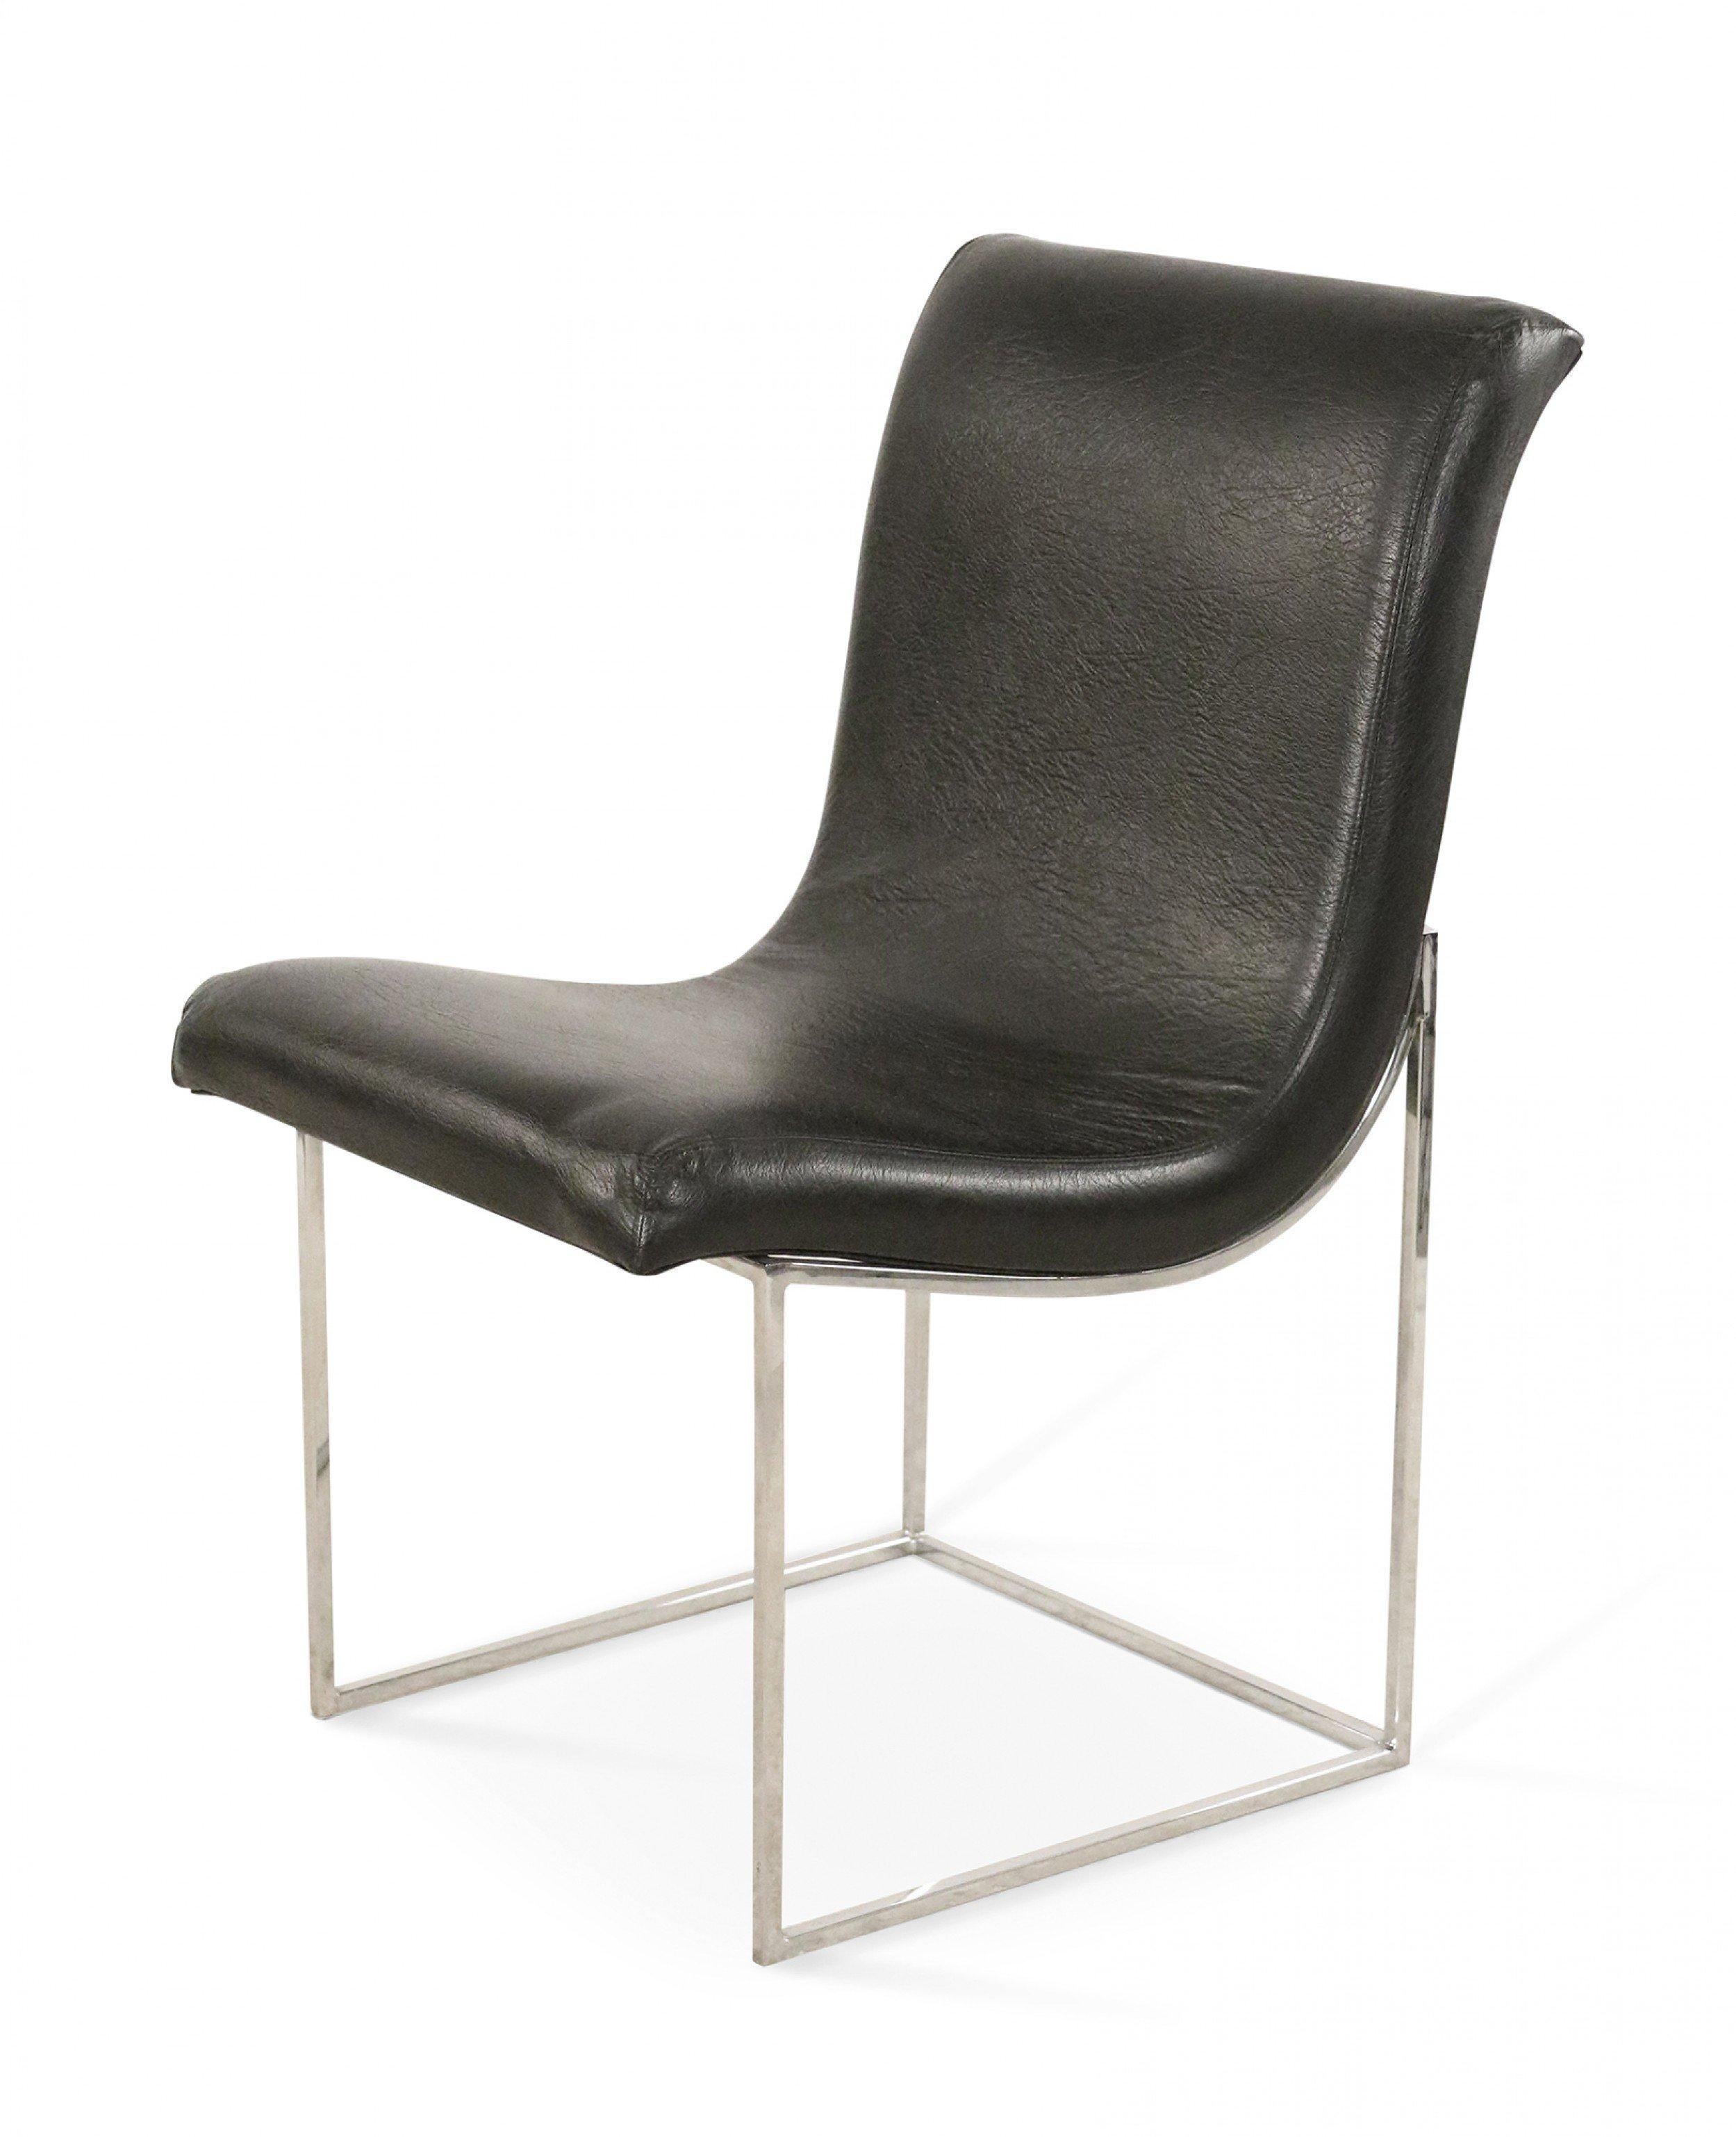 4 Ameican Mid-century black vinyl and chrome frame scoop dining chairs (MILO BAUGHMAN for THAYER COGGIN) (priced each).
      